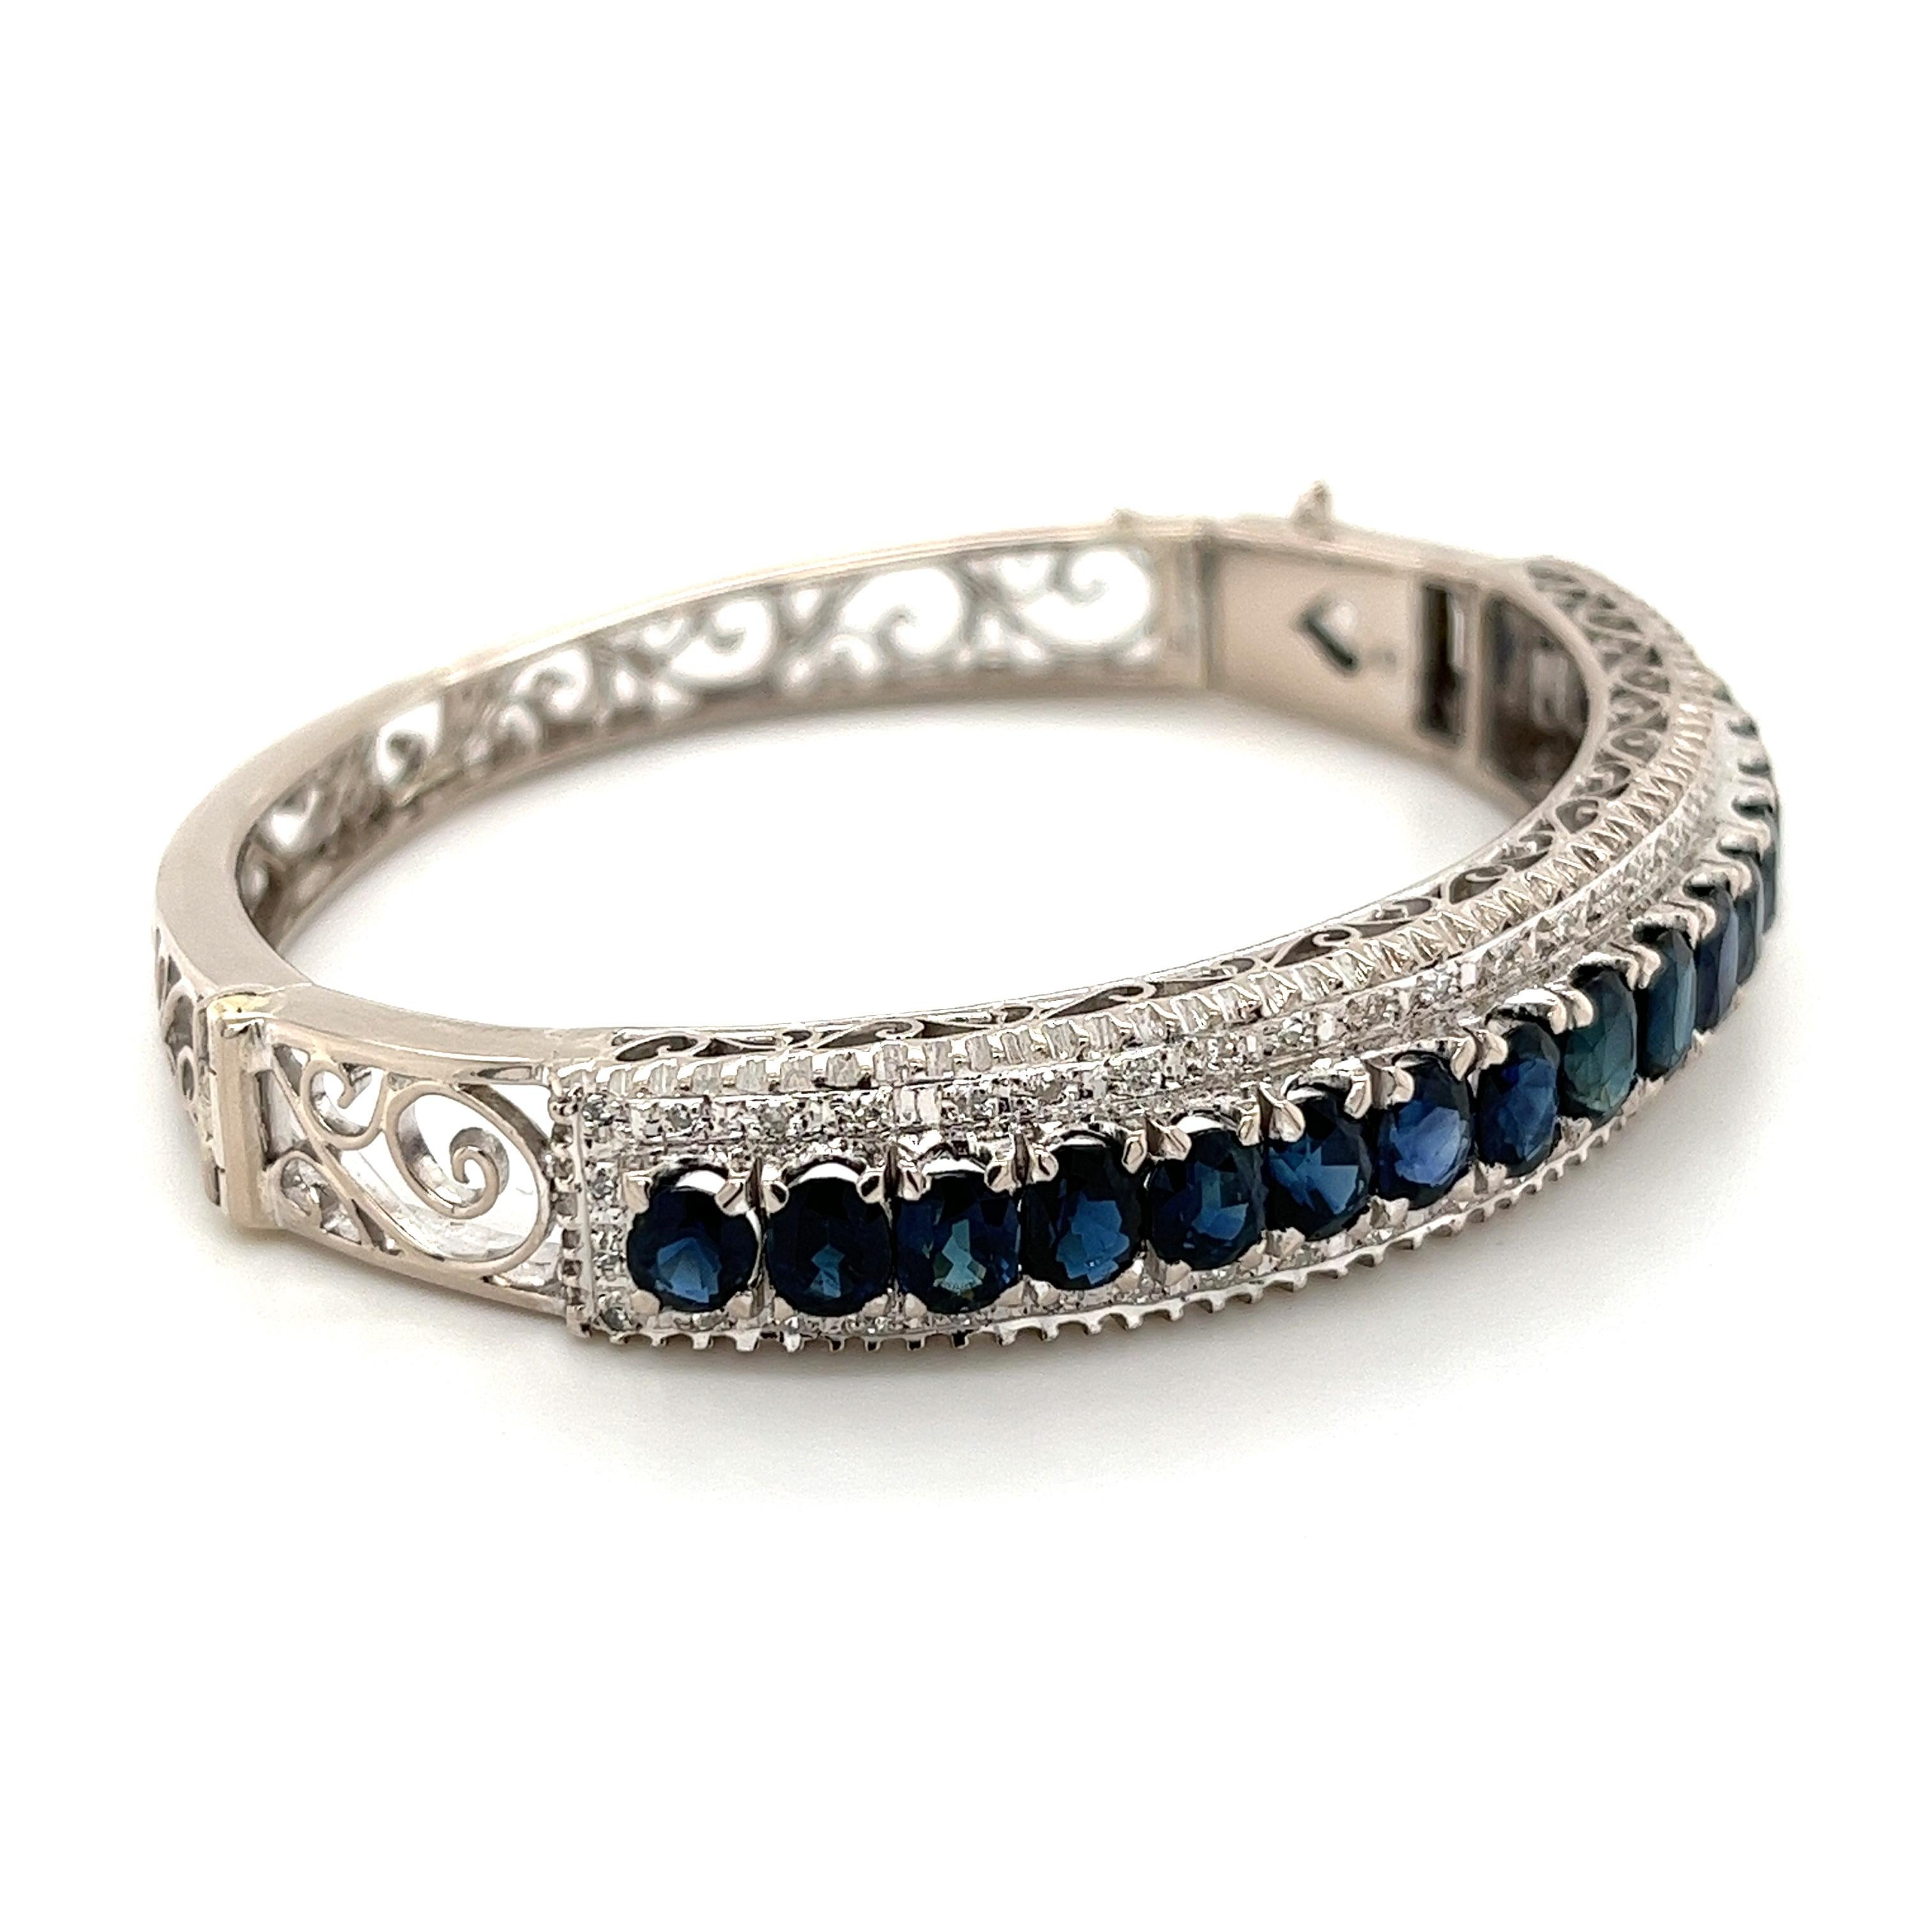 Vintage, Art Deco-inspired, Blue Sapphire bangle in 14 karat solid white gold. Consistent with the iconic symmetrical design pattern of this historical period of art, jewelry, and design.

Each lustrous Blue Sapphire is handset with meticulous